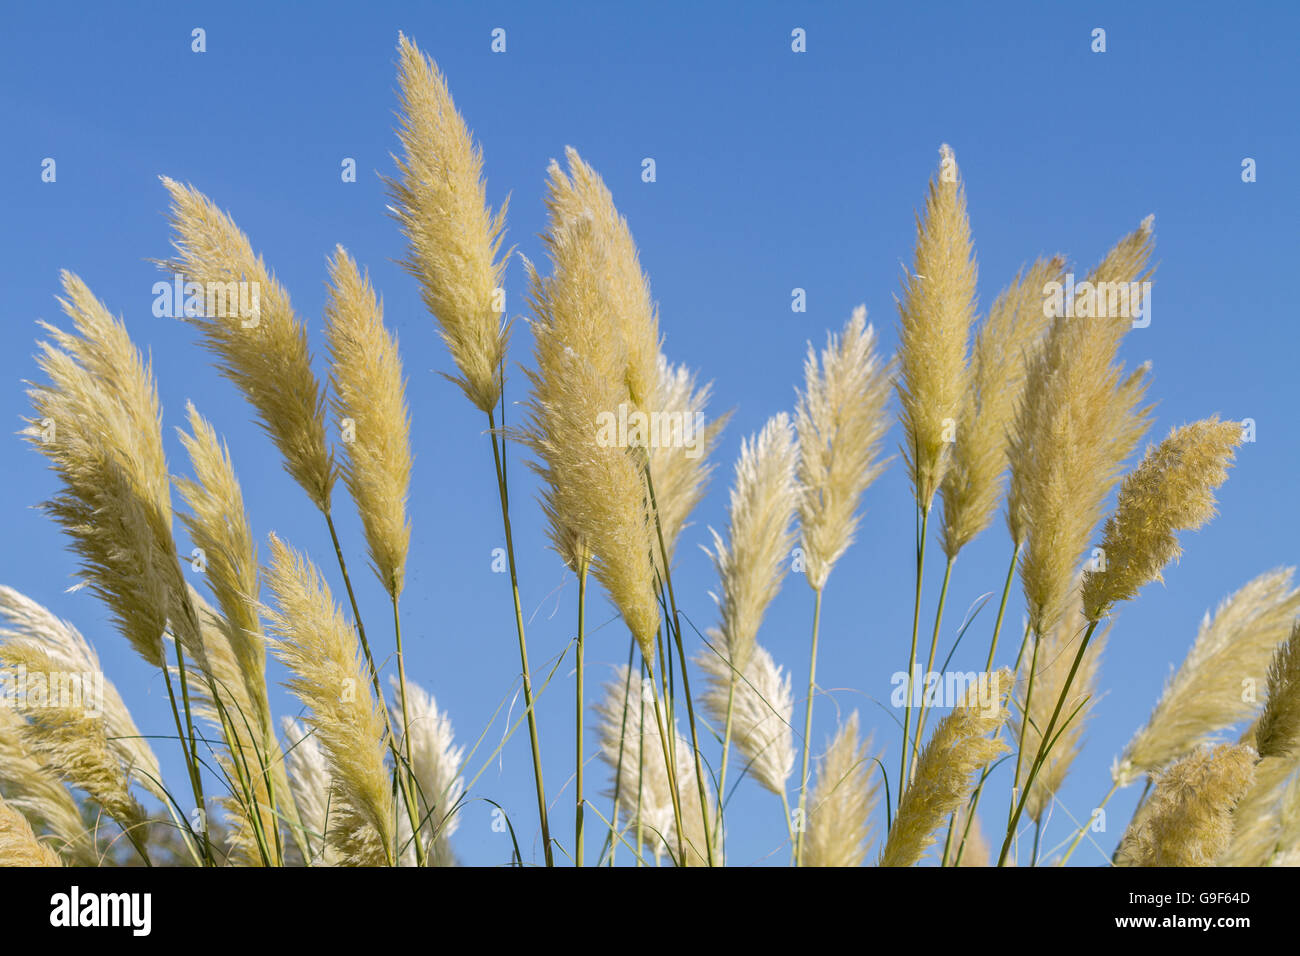 Tall pampass grass swaying majestically in the wind against a blue sky. Stock Photo